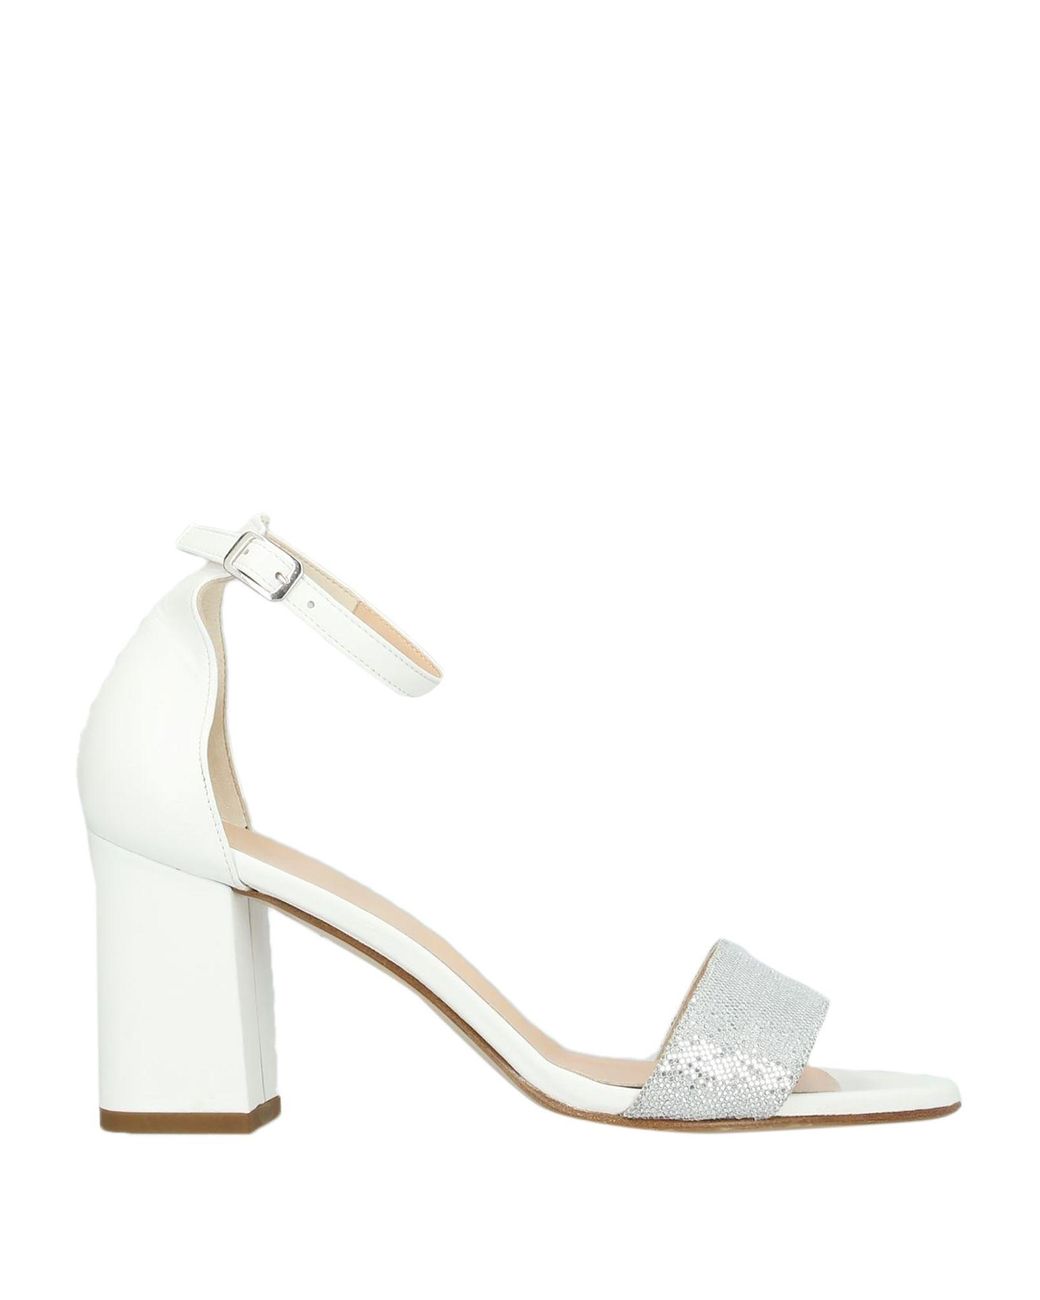 Mauro Fedeli Leather Sandals in White - Lyst